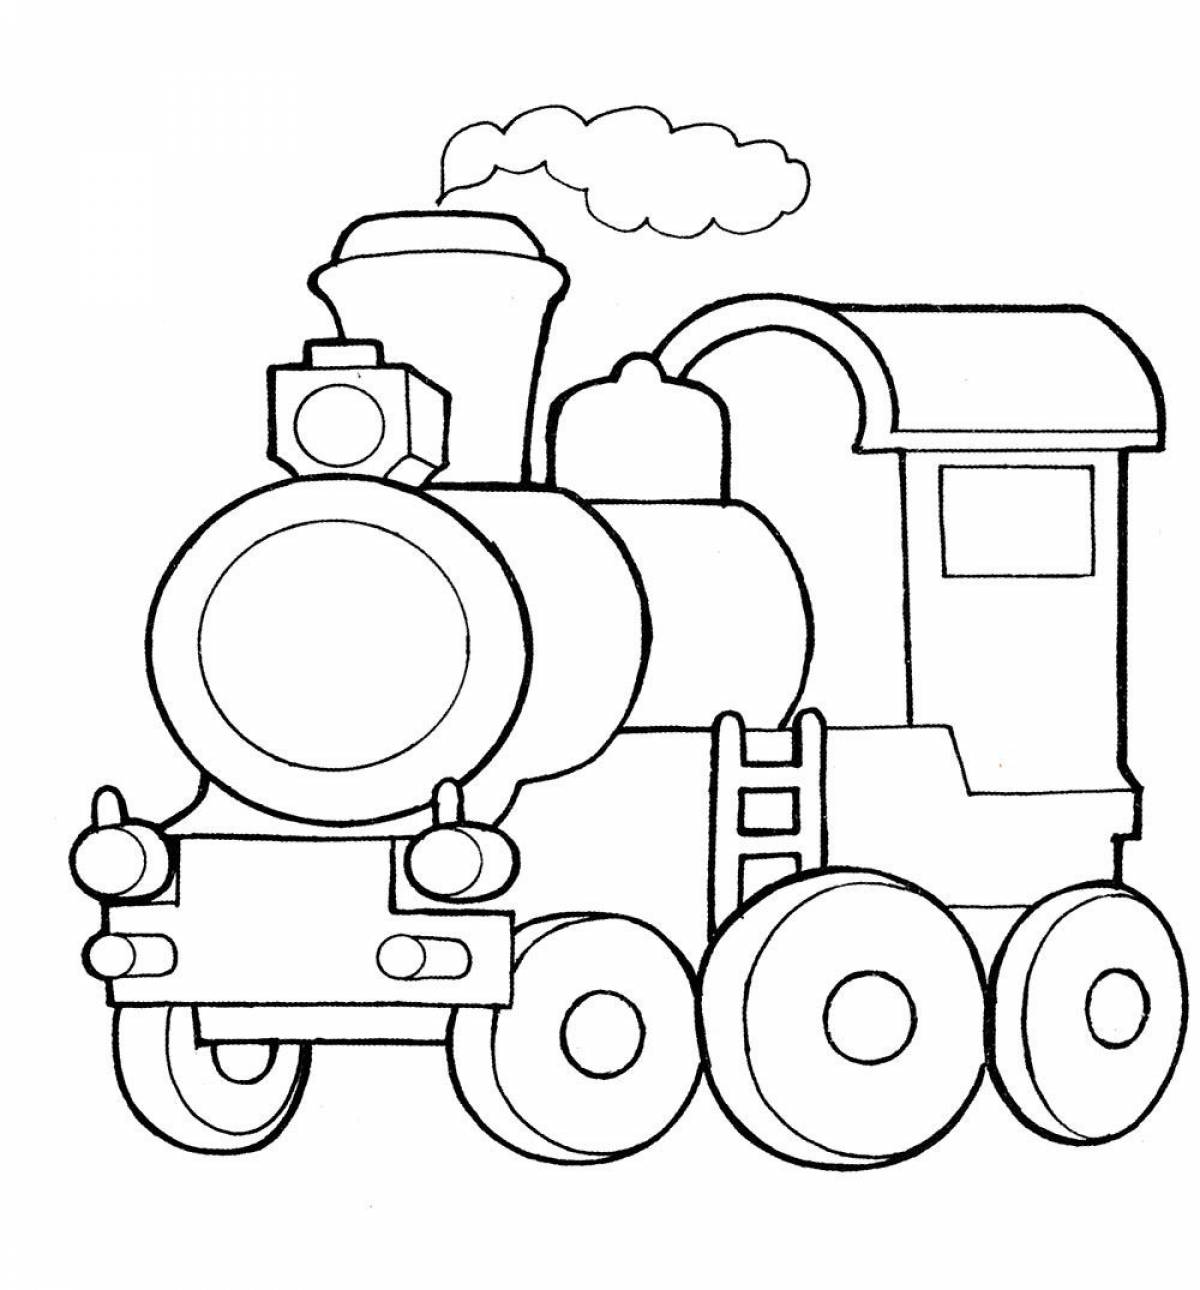 Locomotive coloring pages